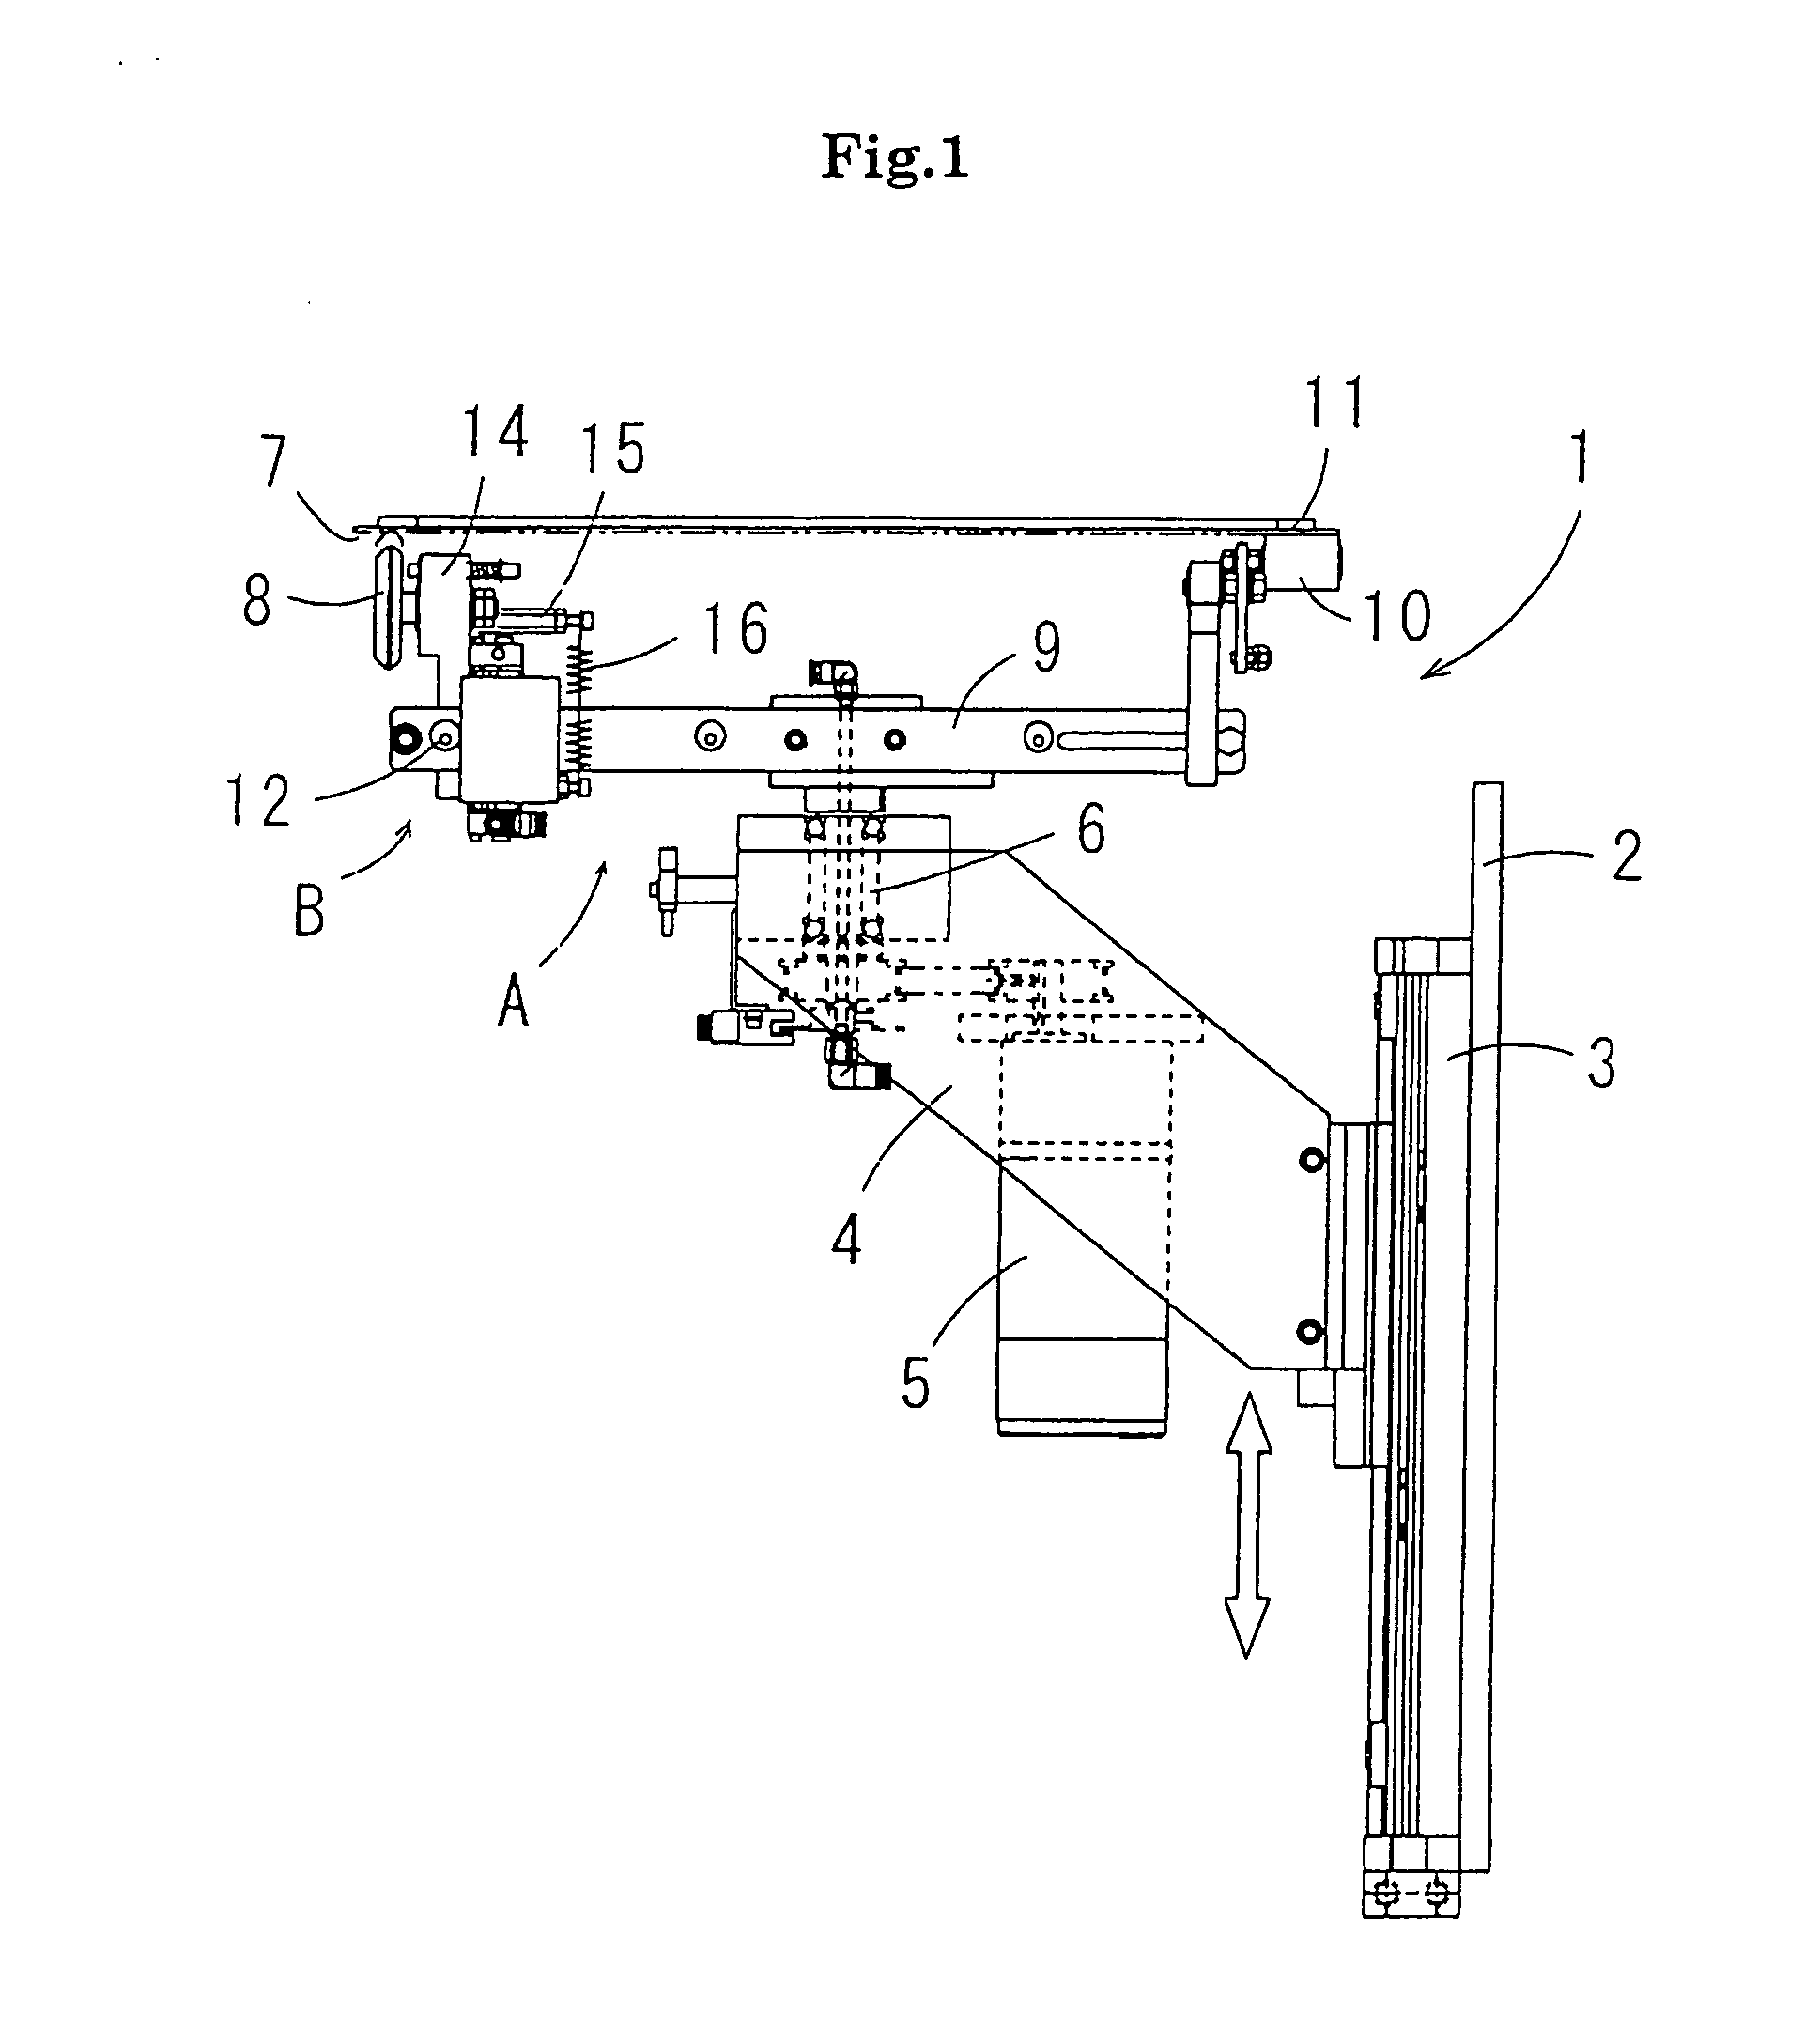 Apparatus for cutting adhesive tape